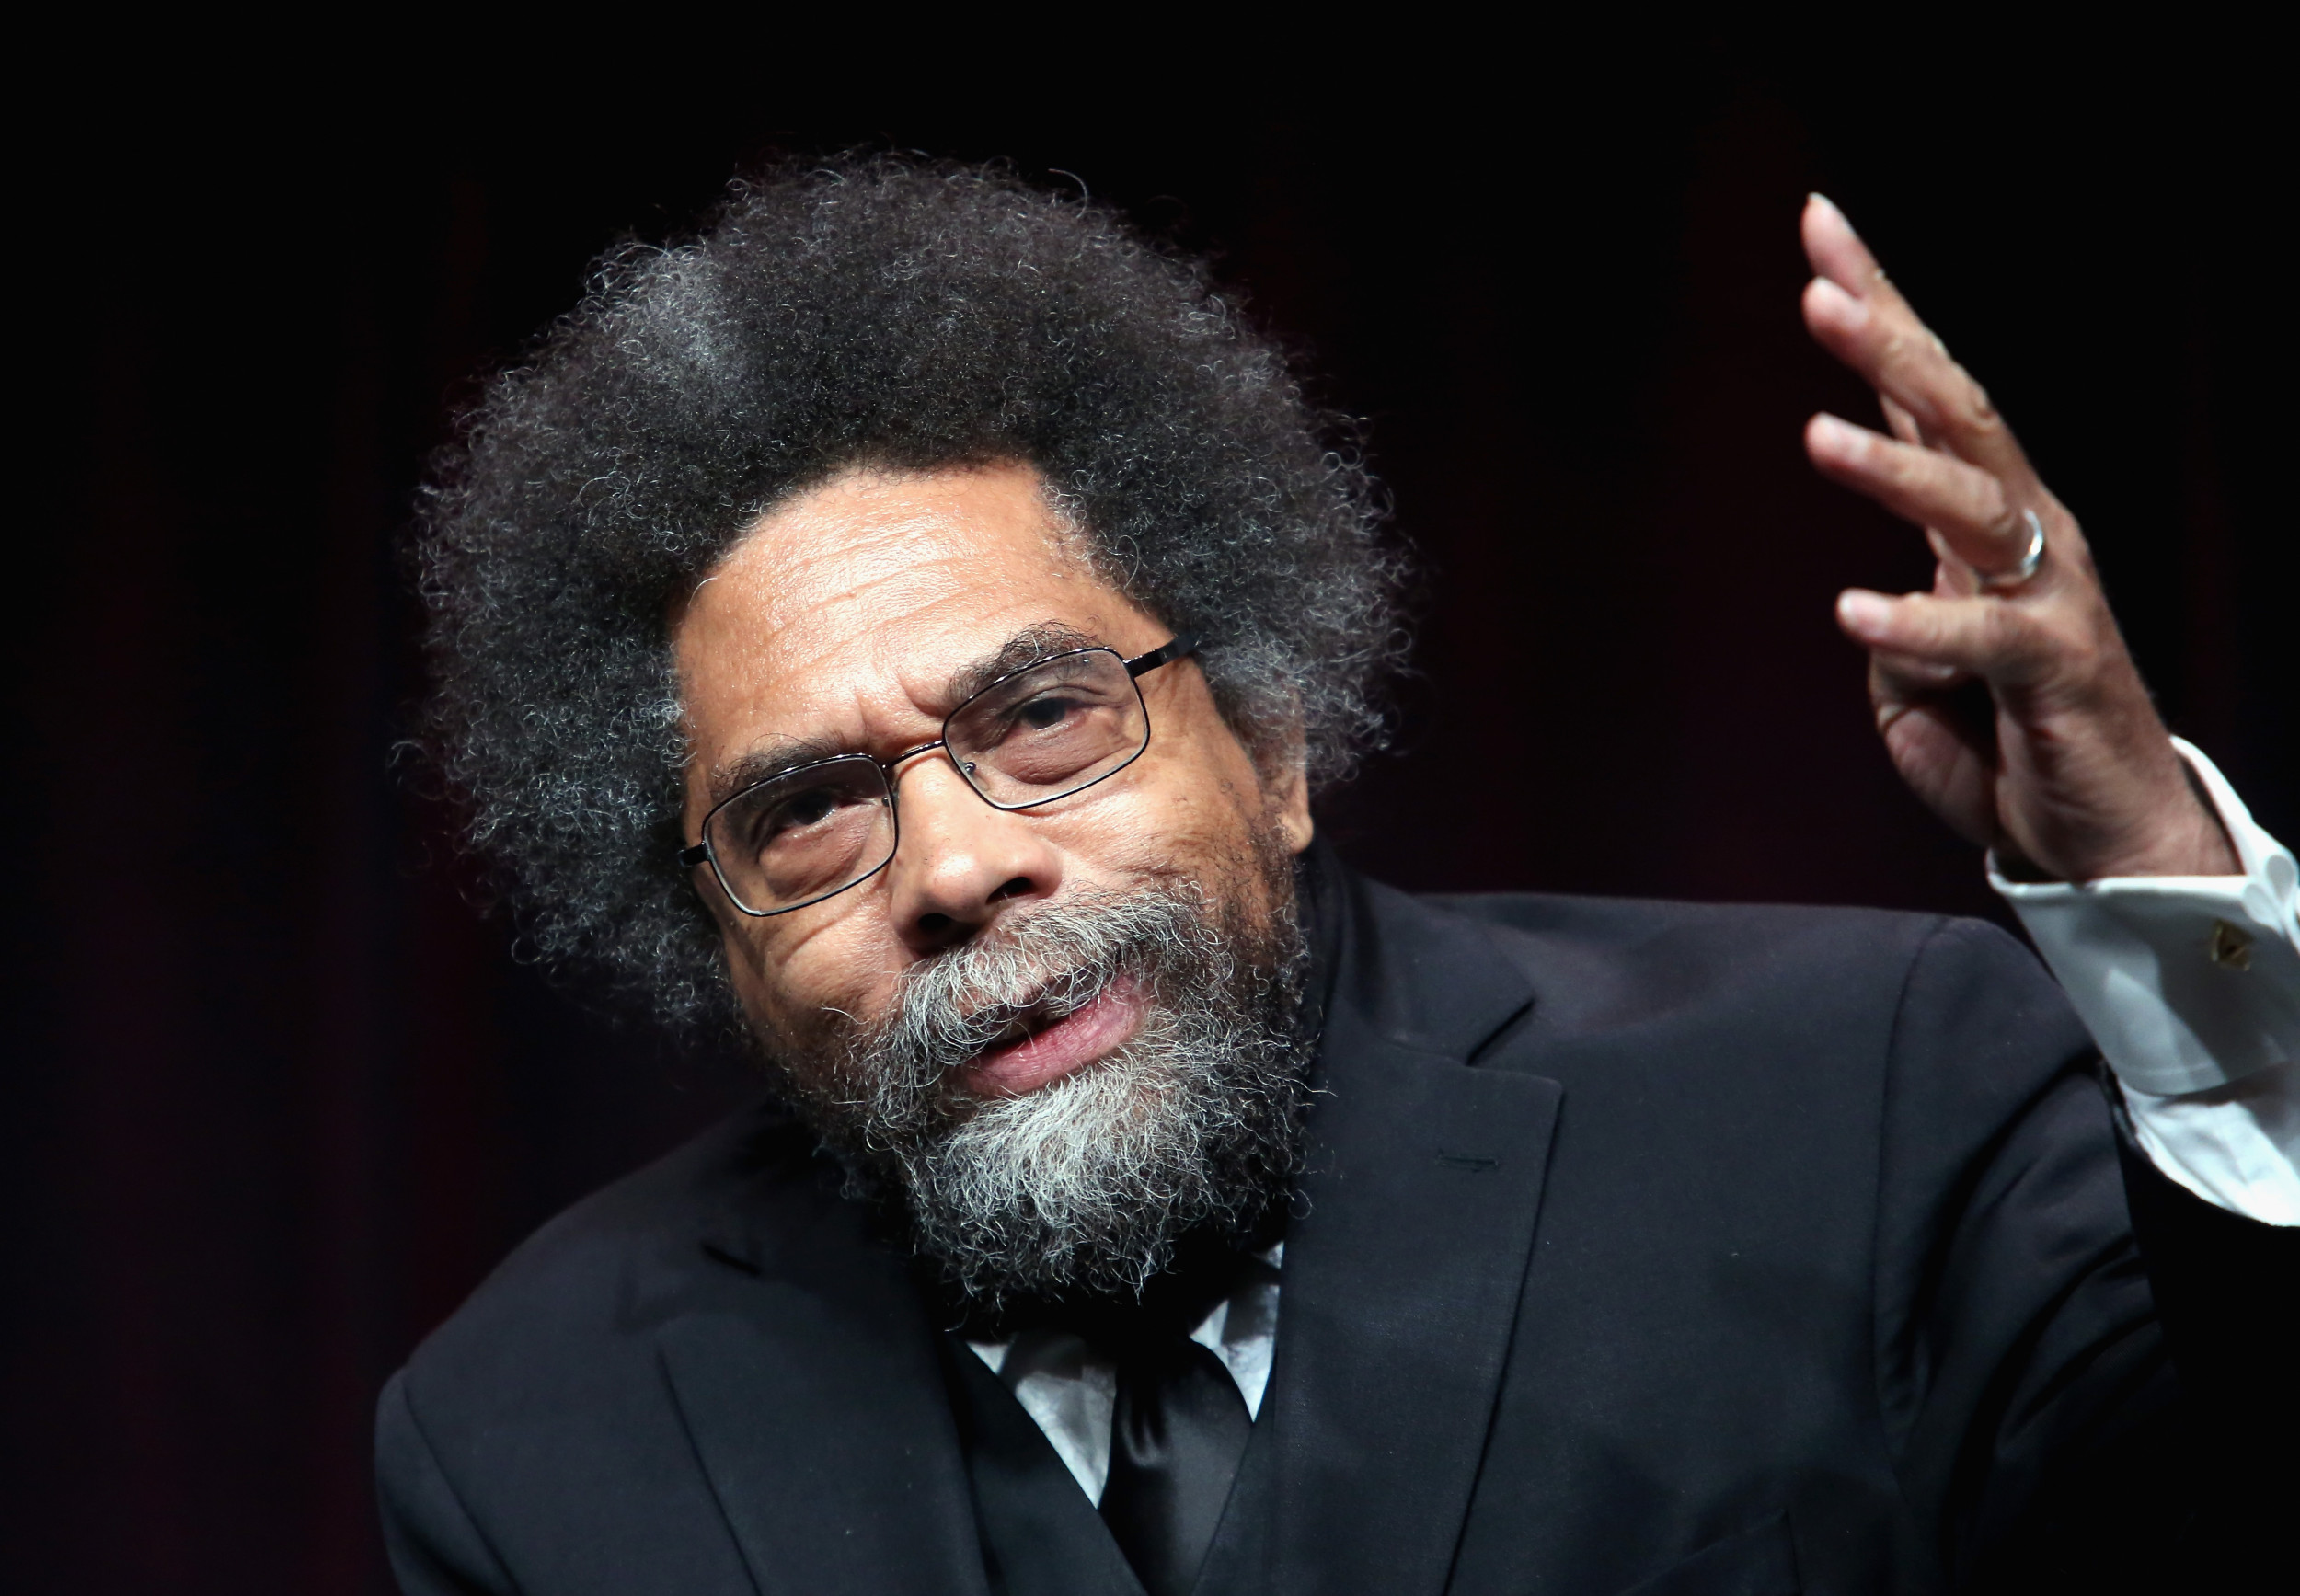 Cornel West Goes Viral Announcing ThirdParty Run to Oust Biden, Stop Trump